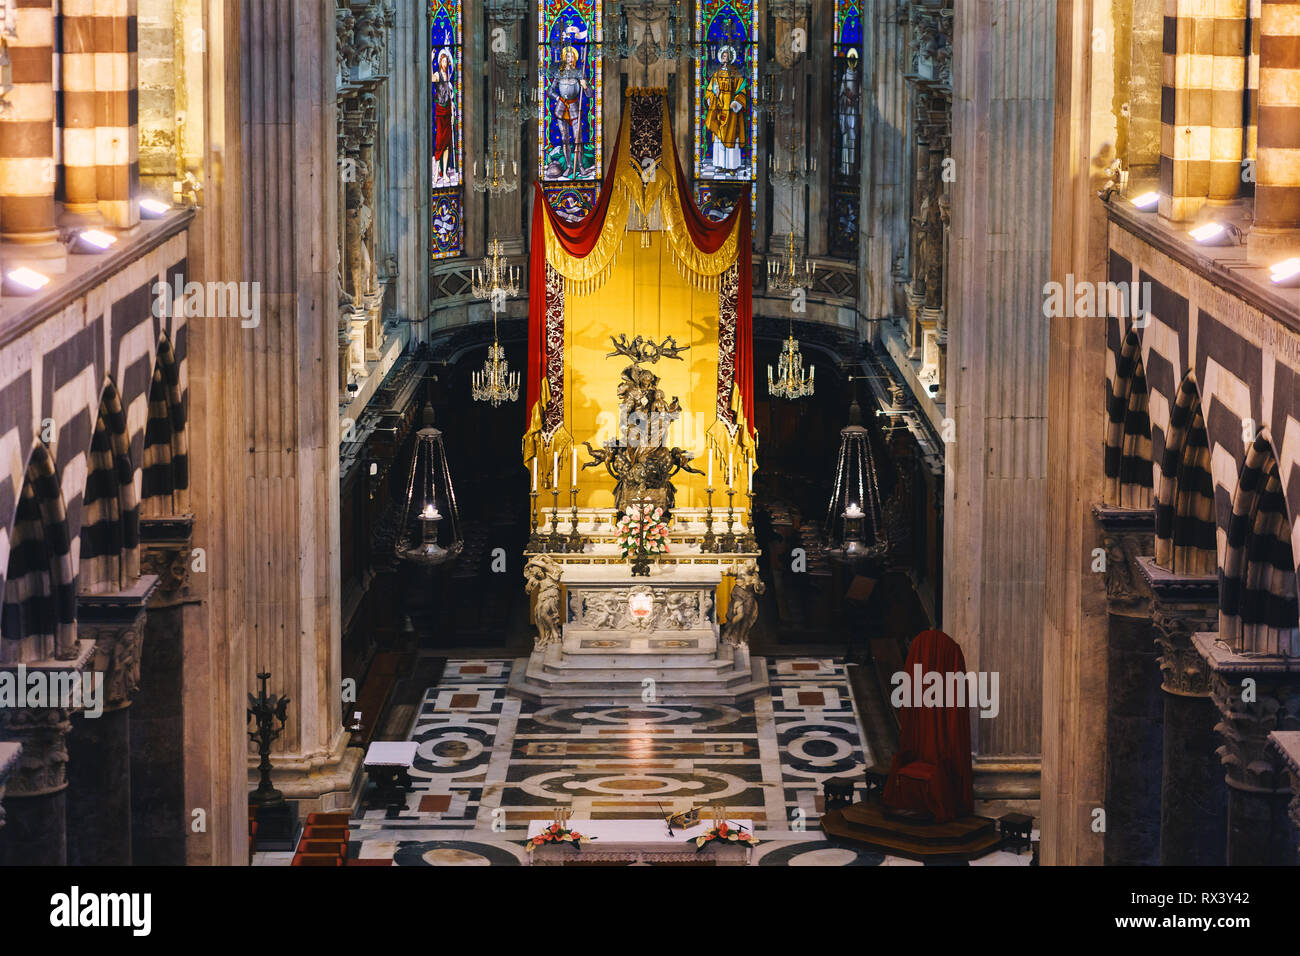 GENOA, ITALY - NOVEMBER 4, 2018: Interior of Cattedrale di San Lorenzo or Cathedral of Saint Lawrence Stock Photo